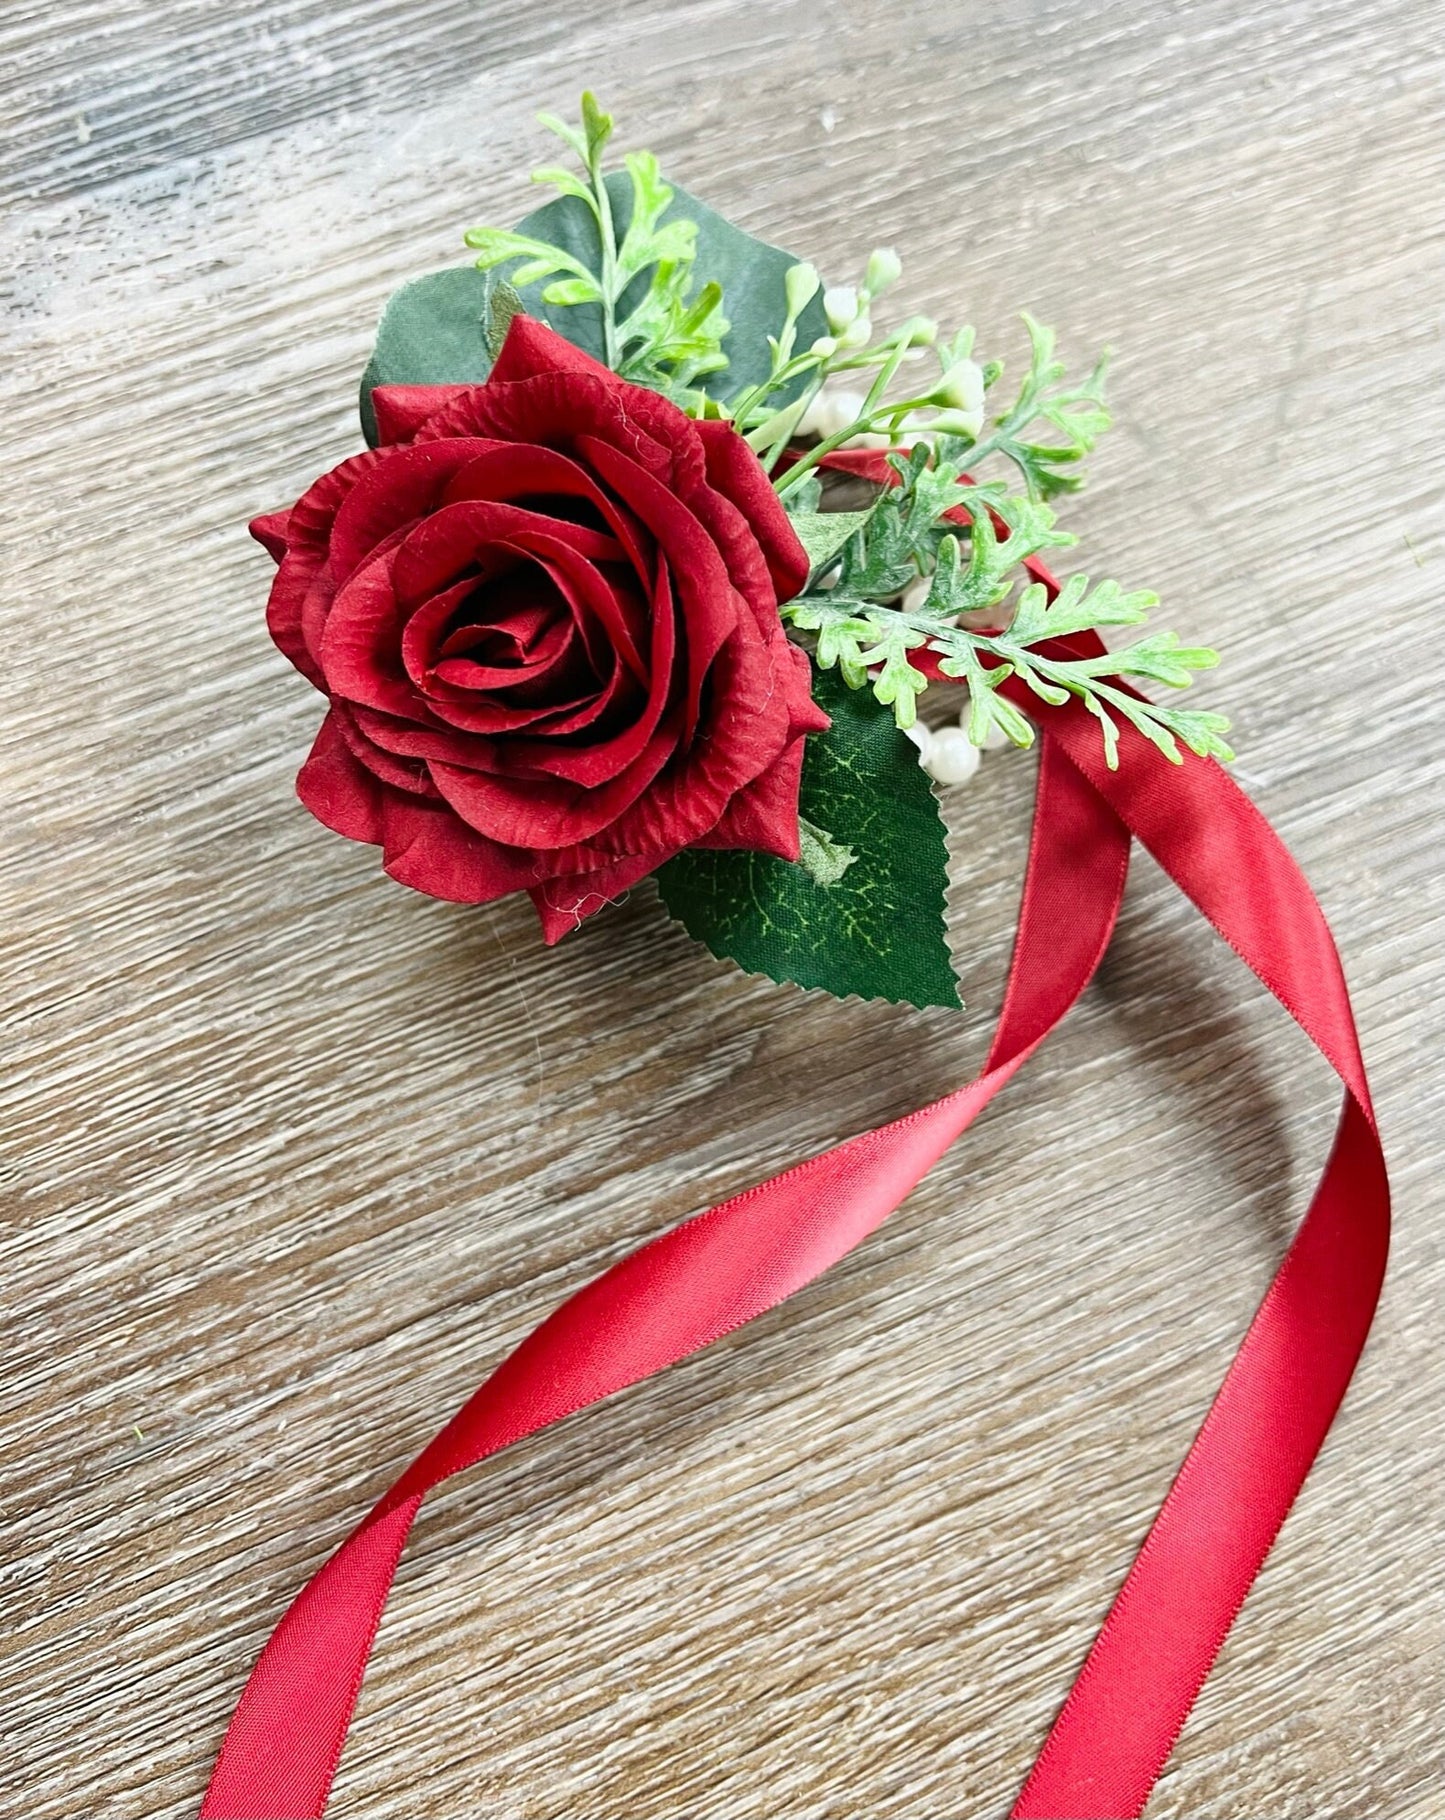 Customizable Lifelike Rose Corsage & Boutonniere Set for Special Occasions